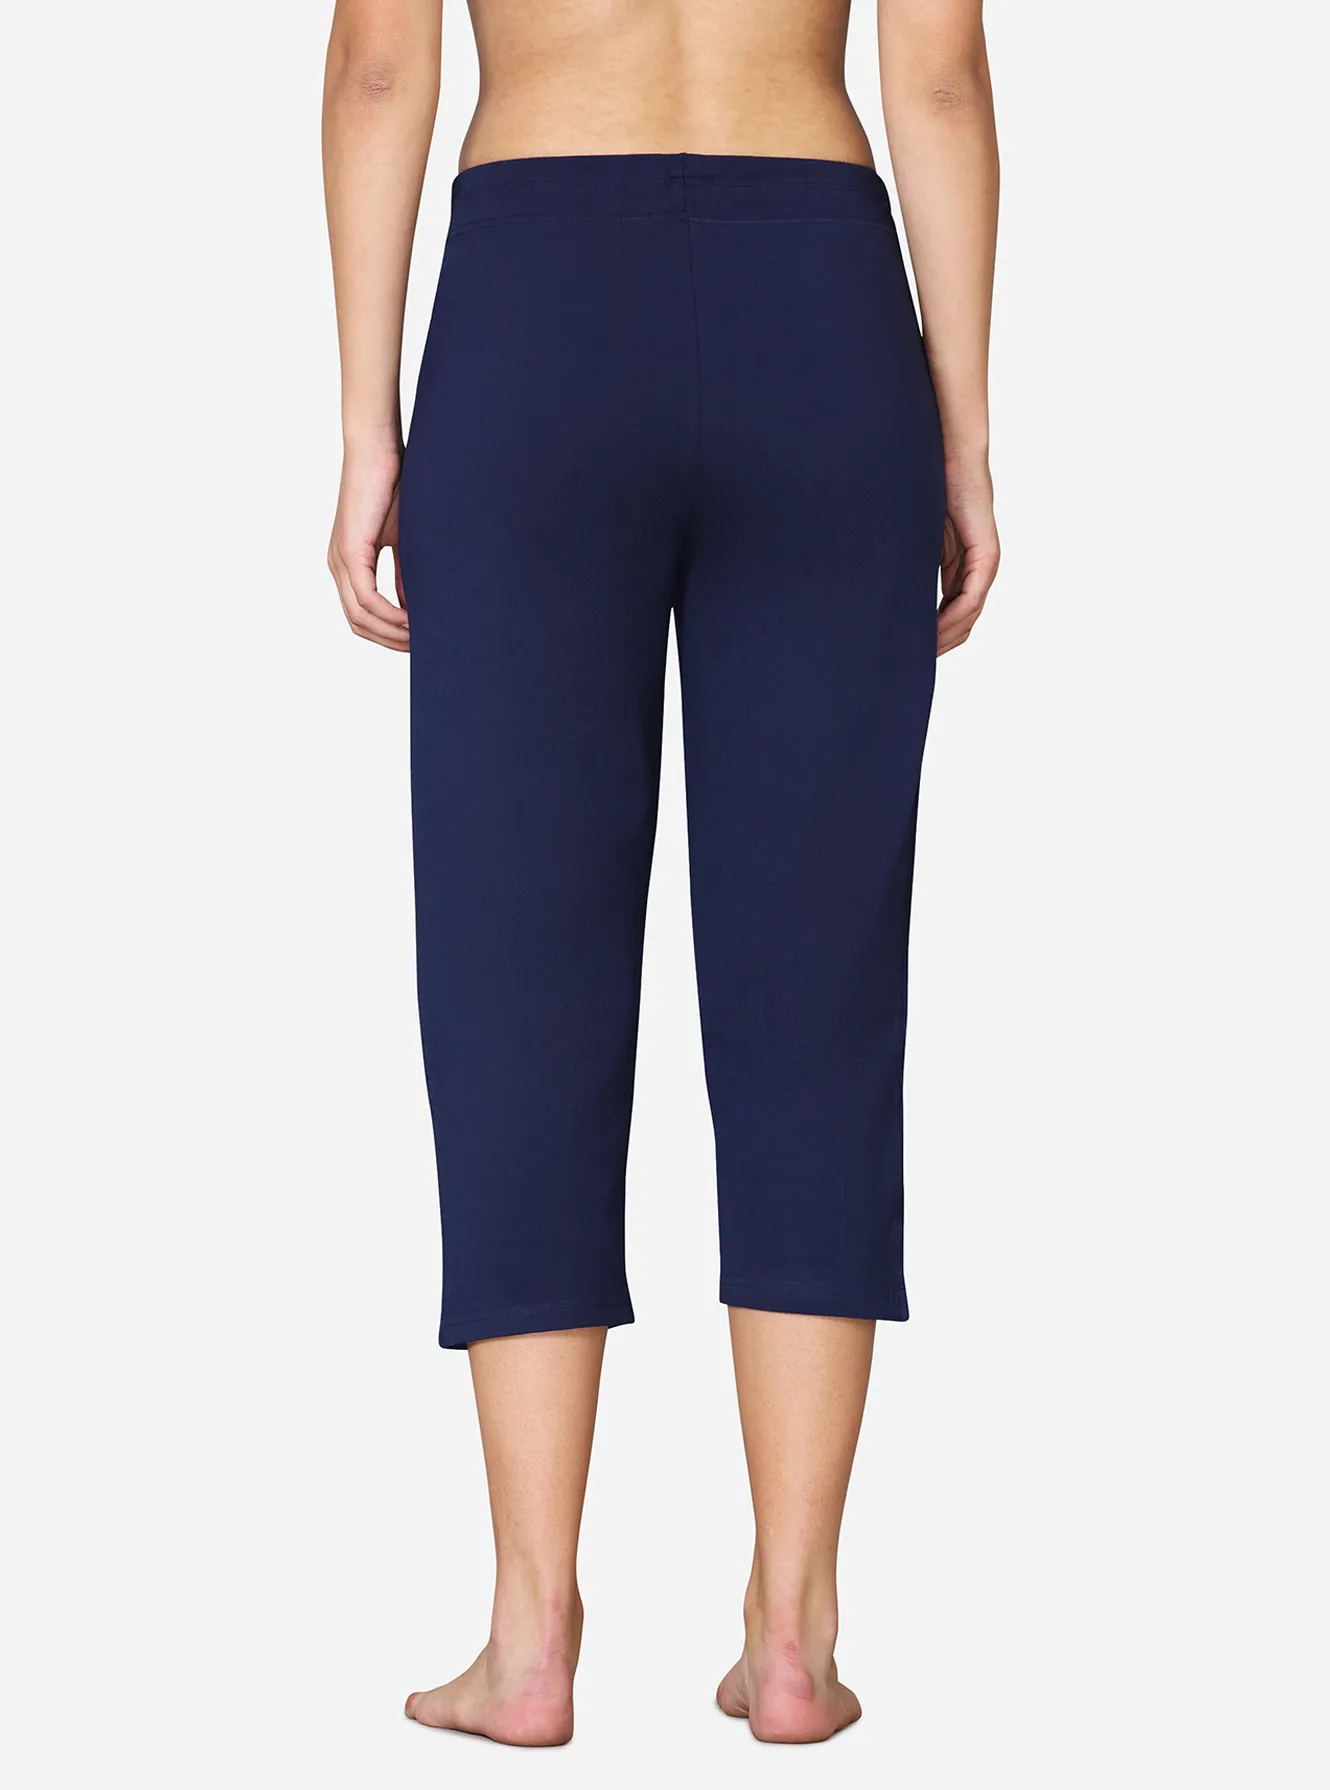 Soft and Stretchable Lounge Capri pants for women Fitmod